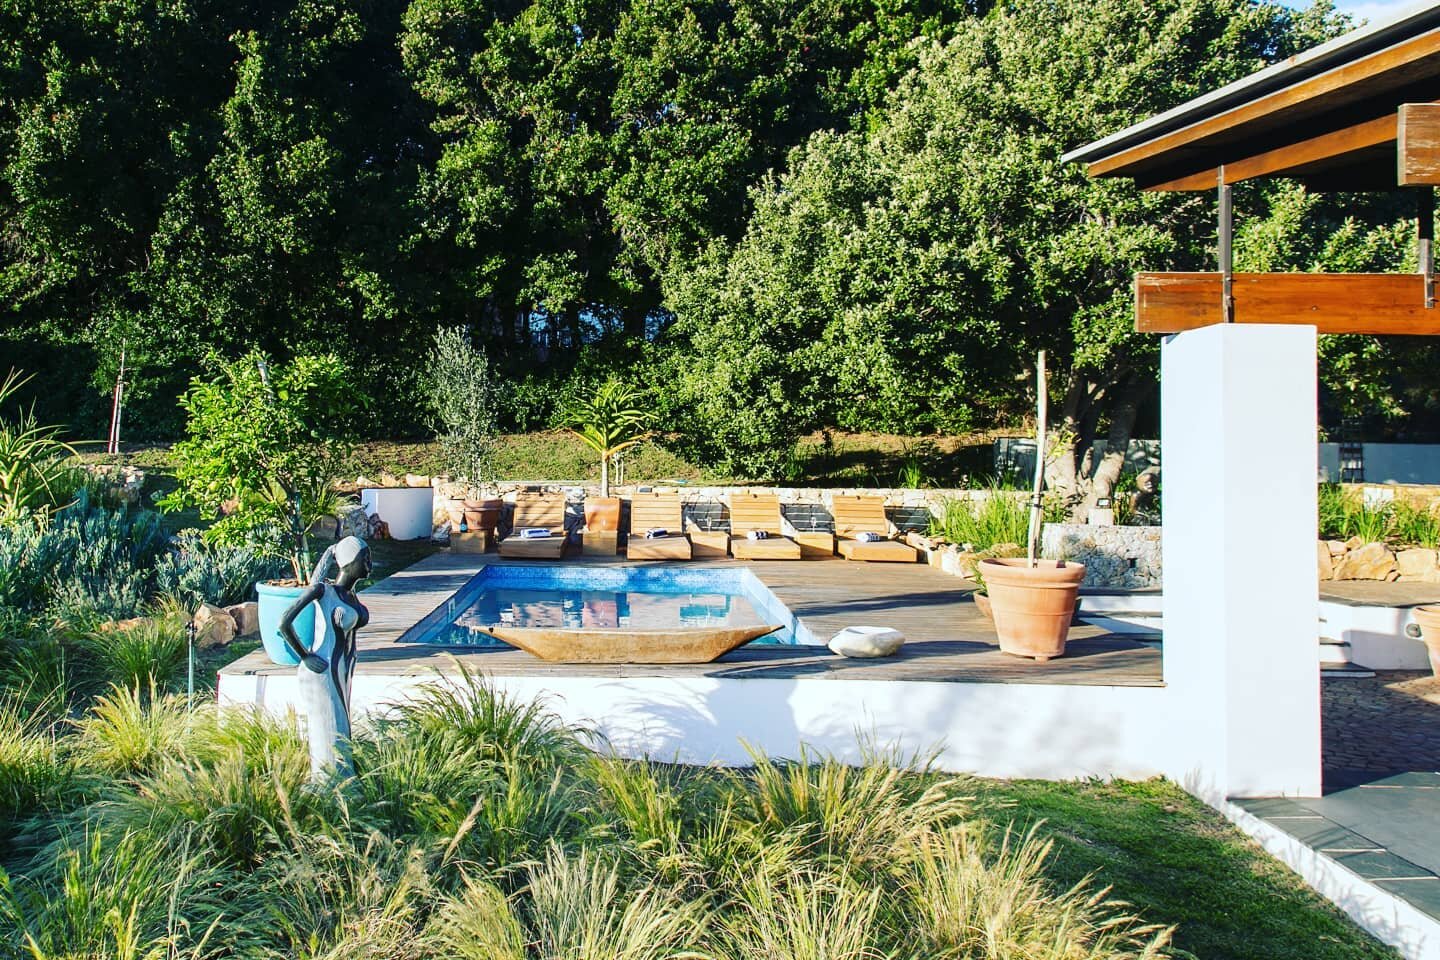 There is nothing wrong with dreaming about summer pool days at this dream pool even in the middle of the deepest winter. @kinghornsgardens #thisissouthafrica #capetownsouthafrica #kinghornsgardens #pool #swimming #summer #accommodation #luxuryselfcat